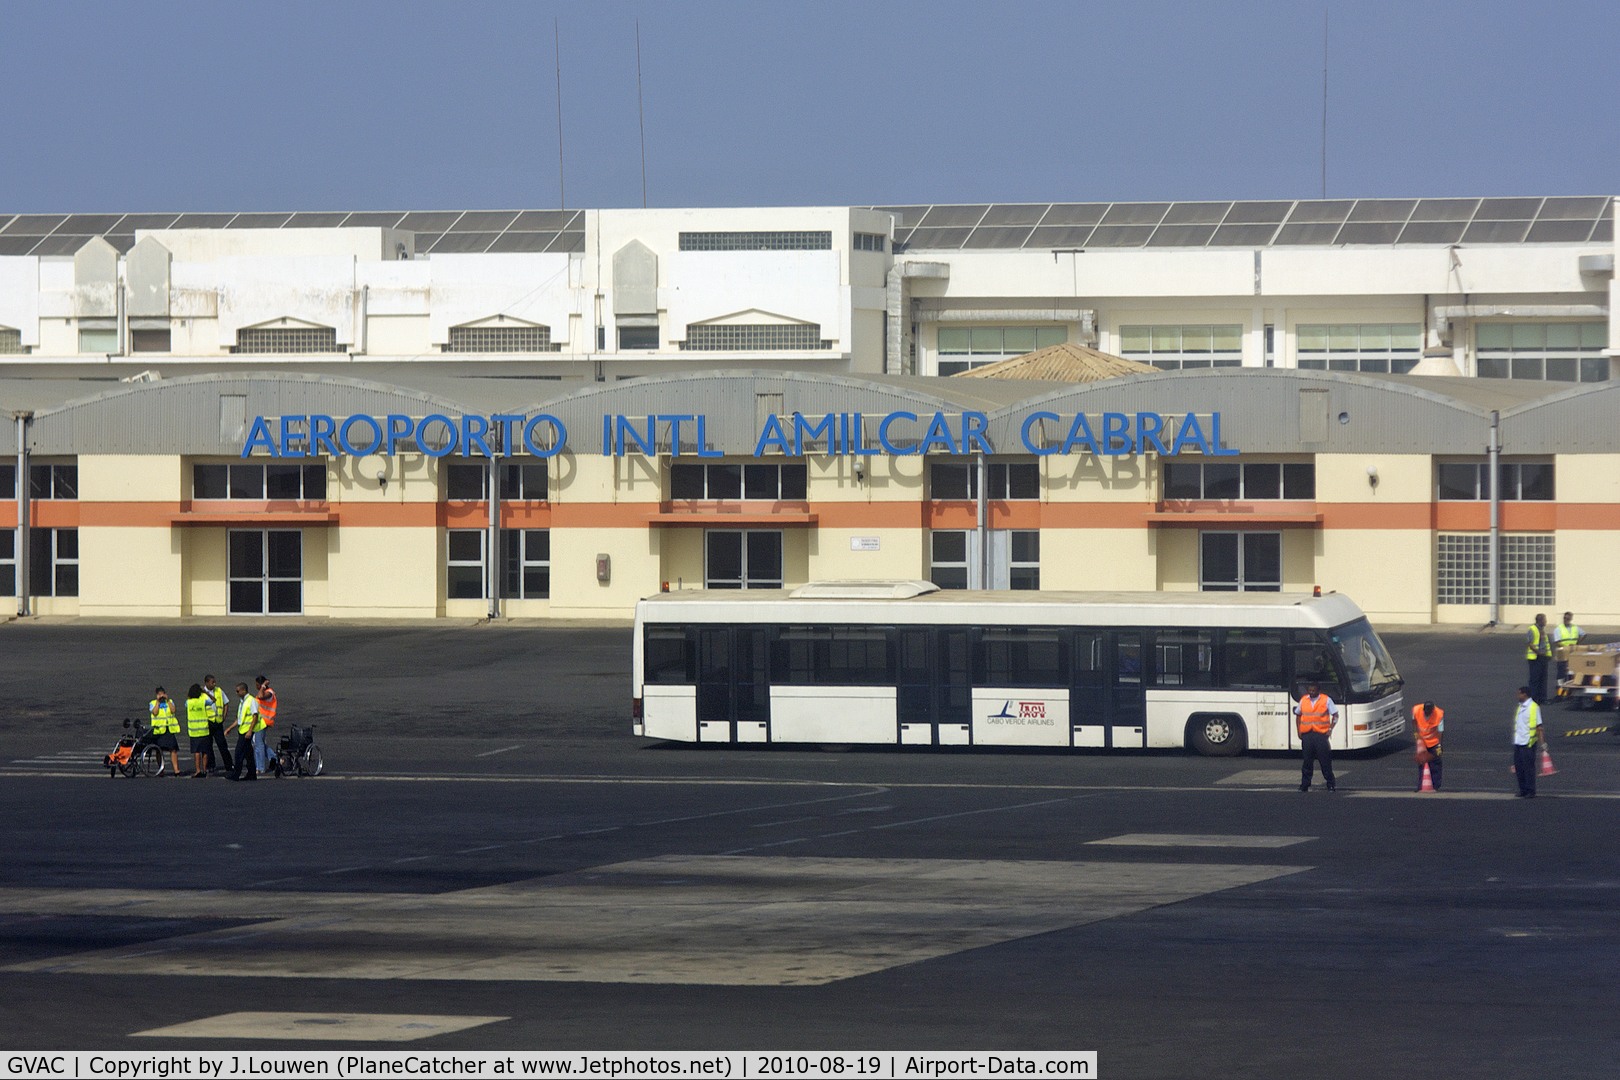 Amilcar Cabral International Airport, Sal, Espargos Cape Verde (GVAC) - Terminal seen from the airport side.